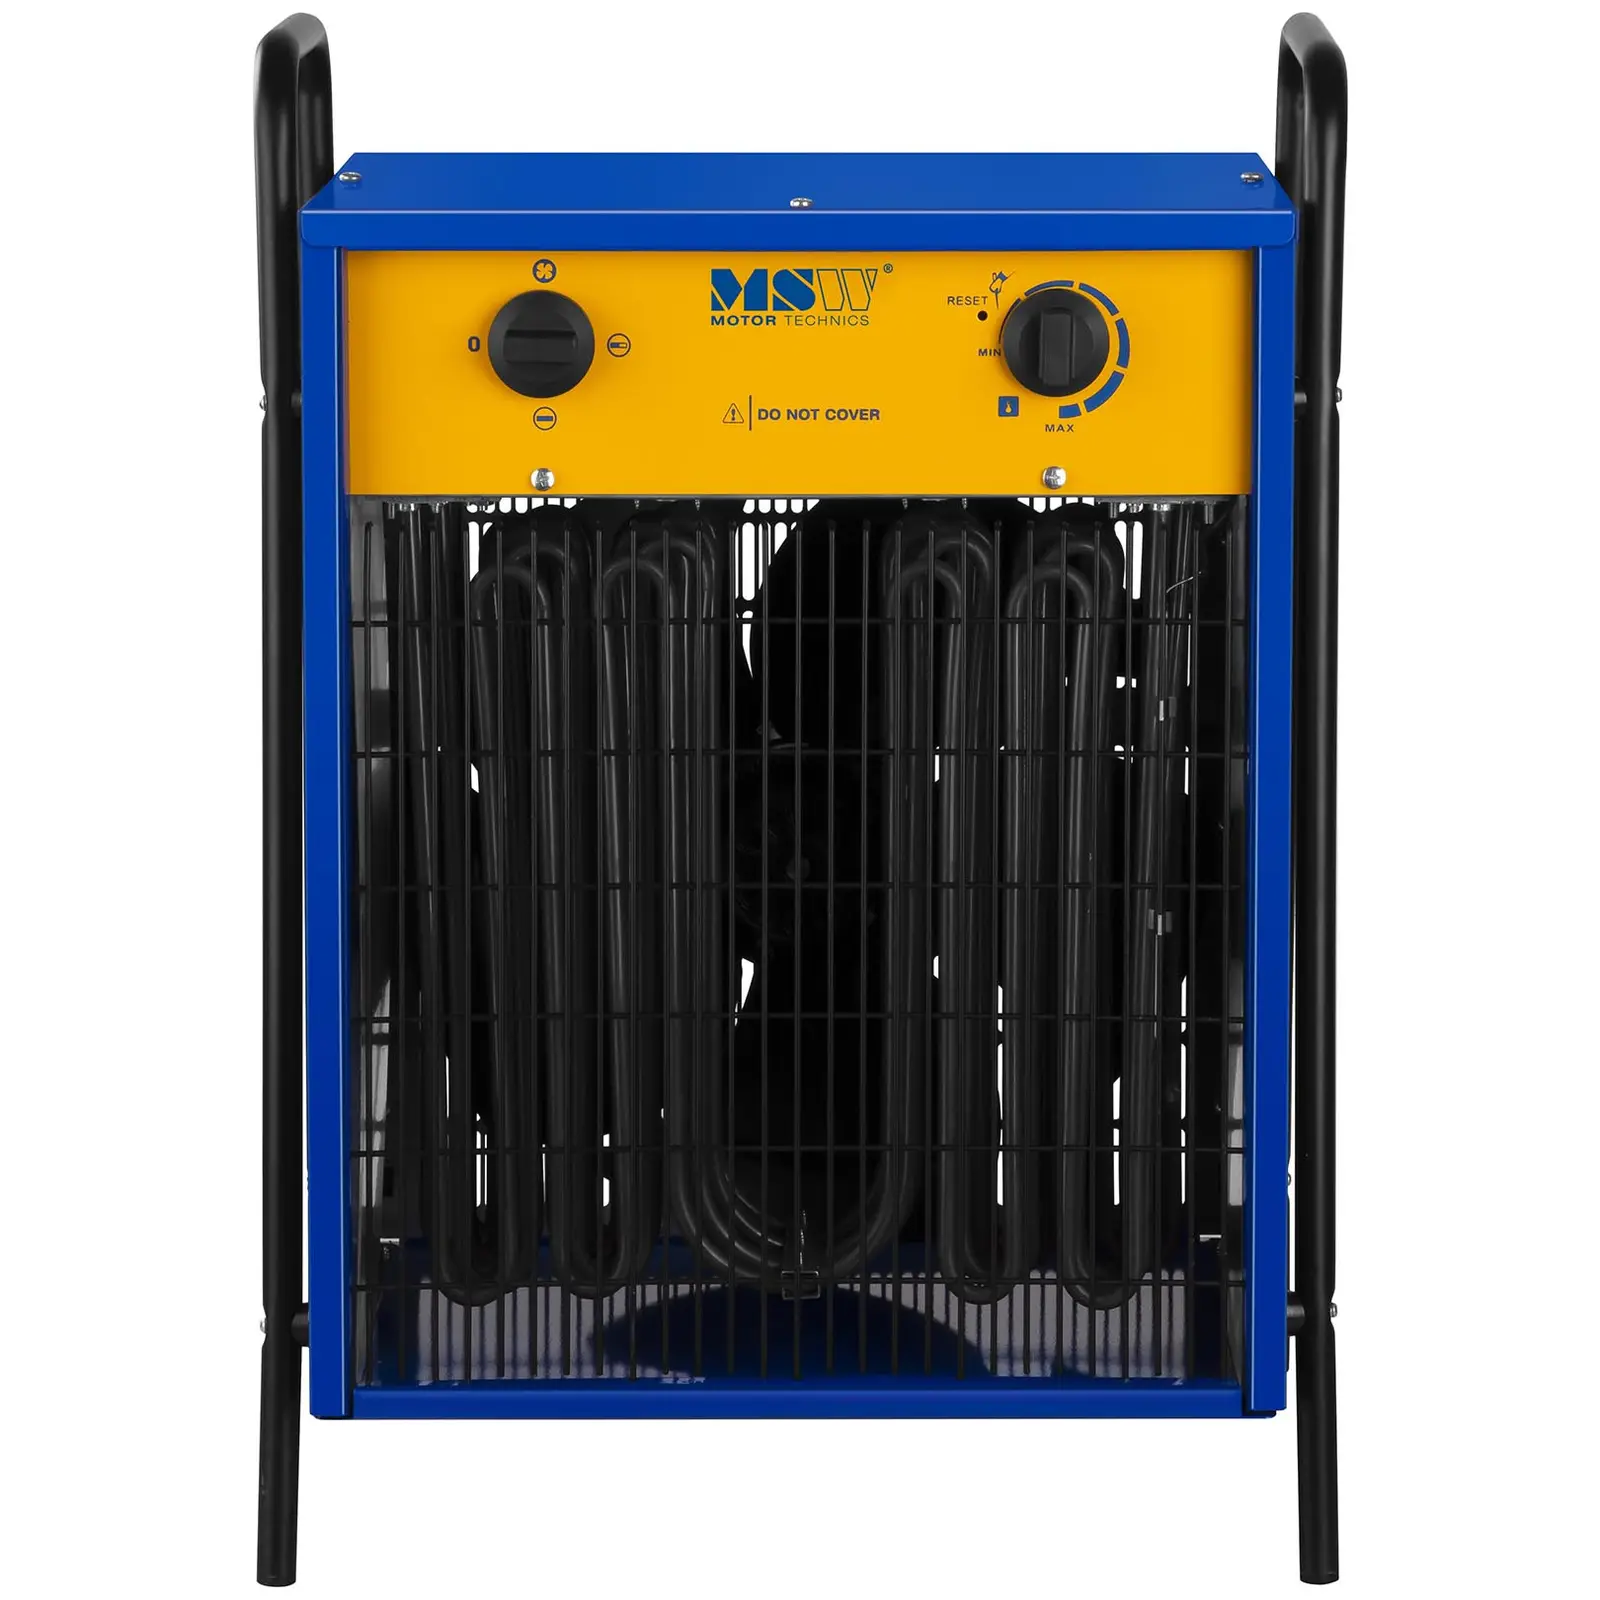 Factory second Industrial Electric Heater with Cooling Function - 0 to 40 °C - 22.000 W